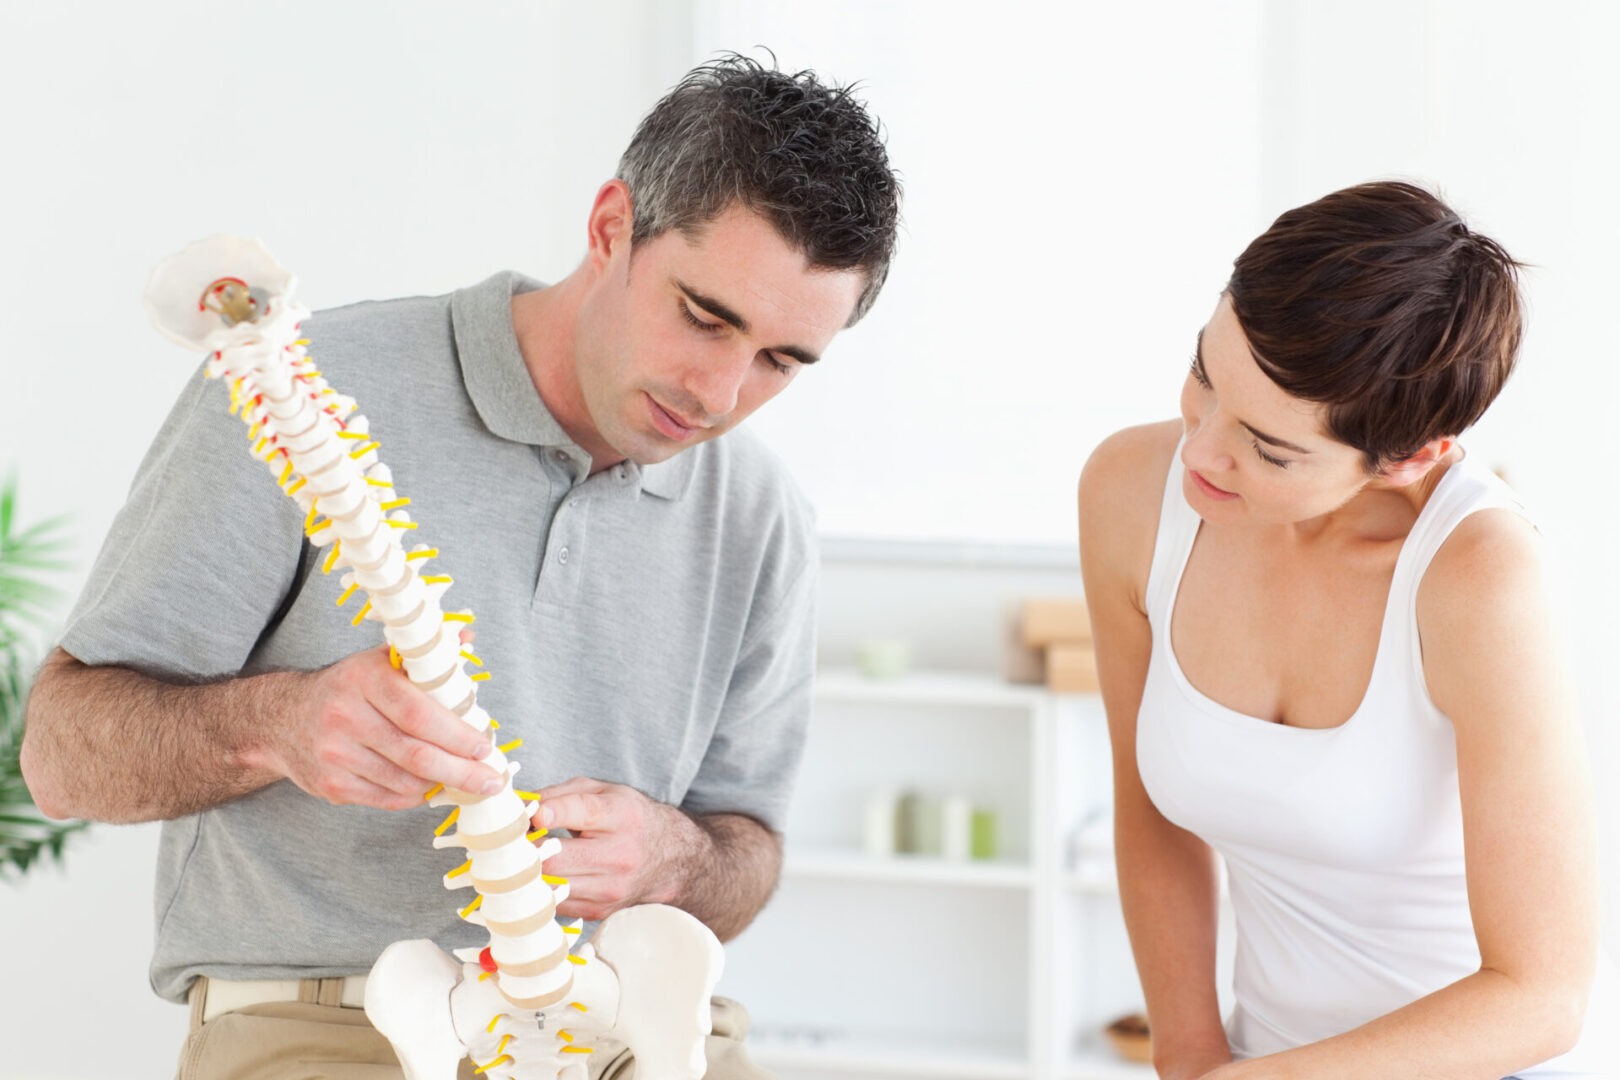 Chiropractor,And,Patient,Looking,At,A,Model,Of,A,Spine